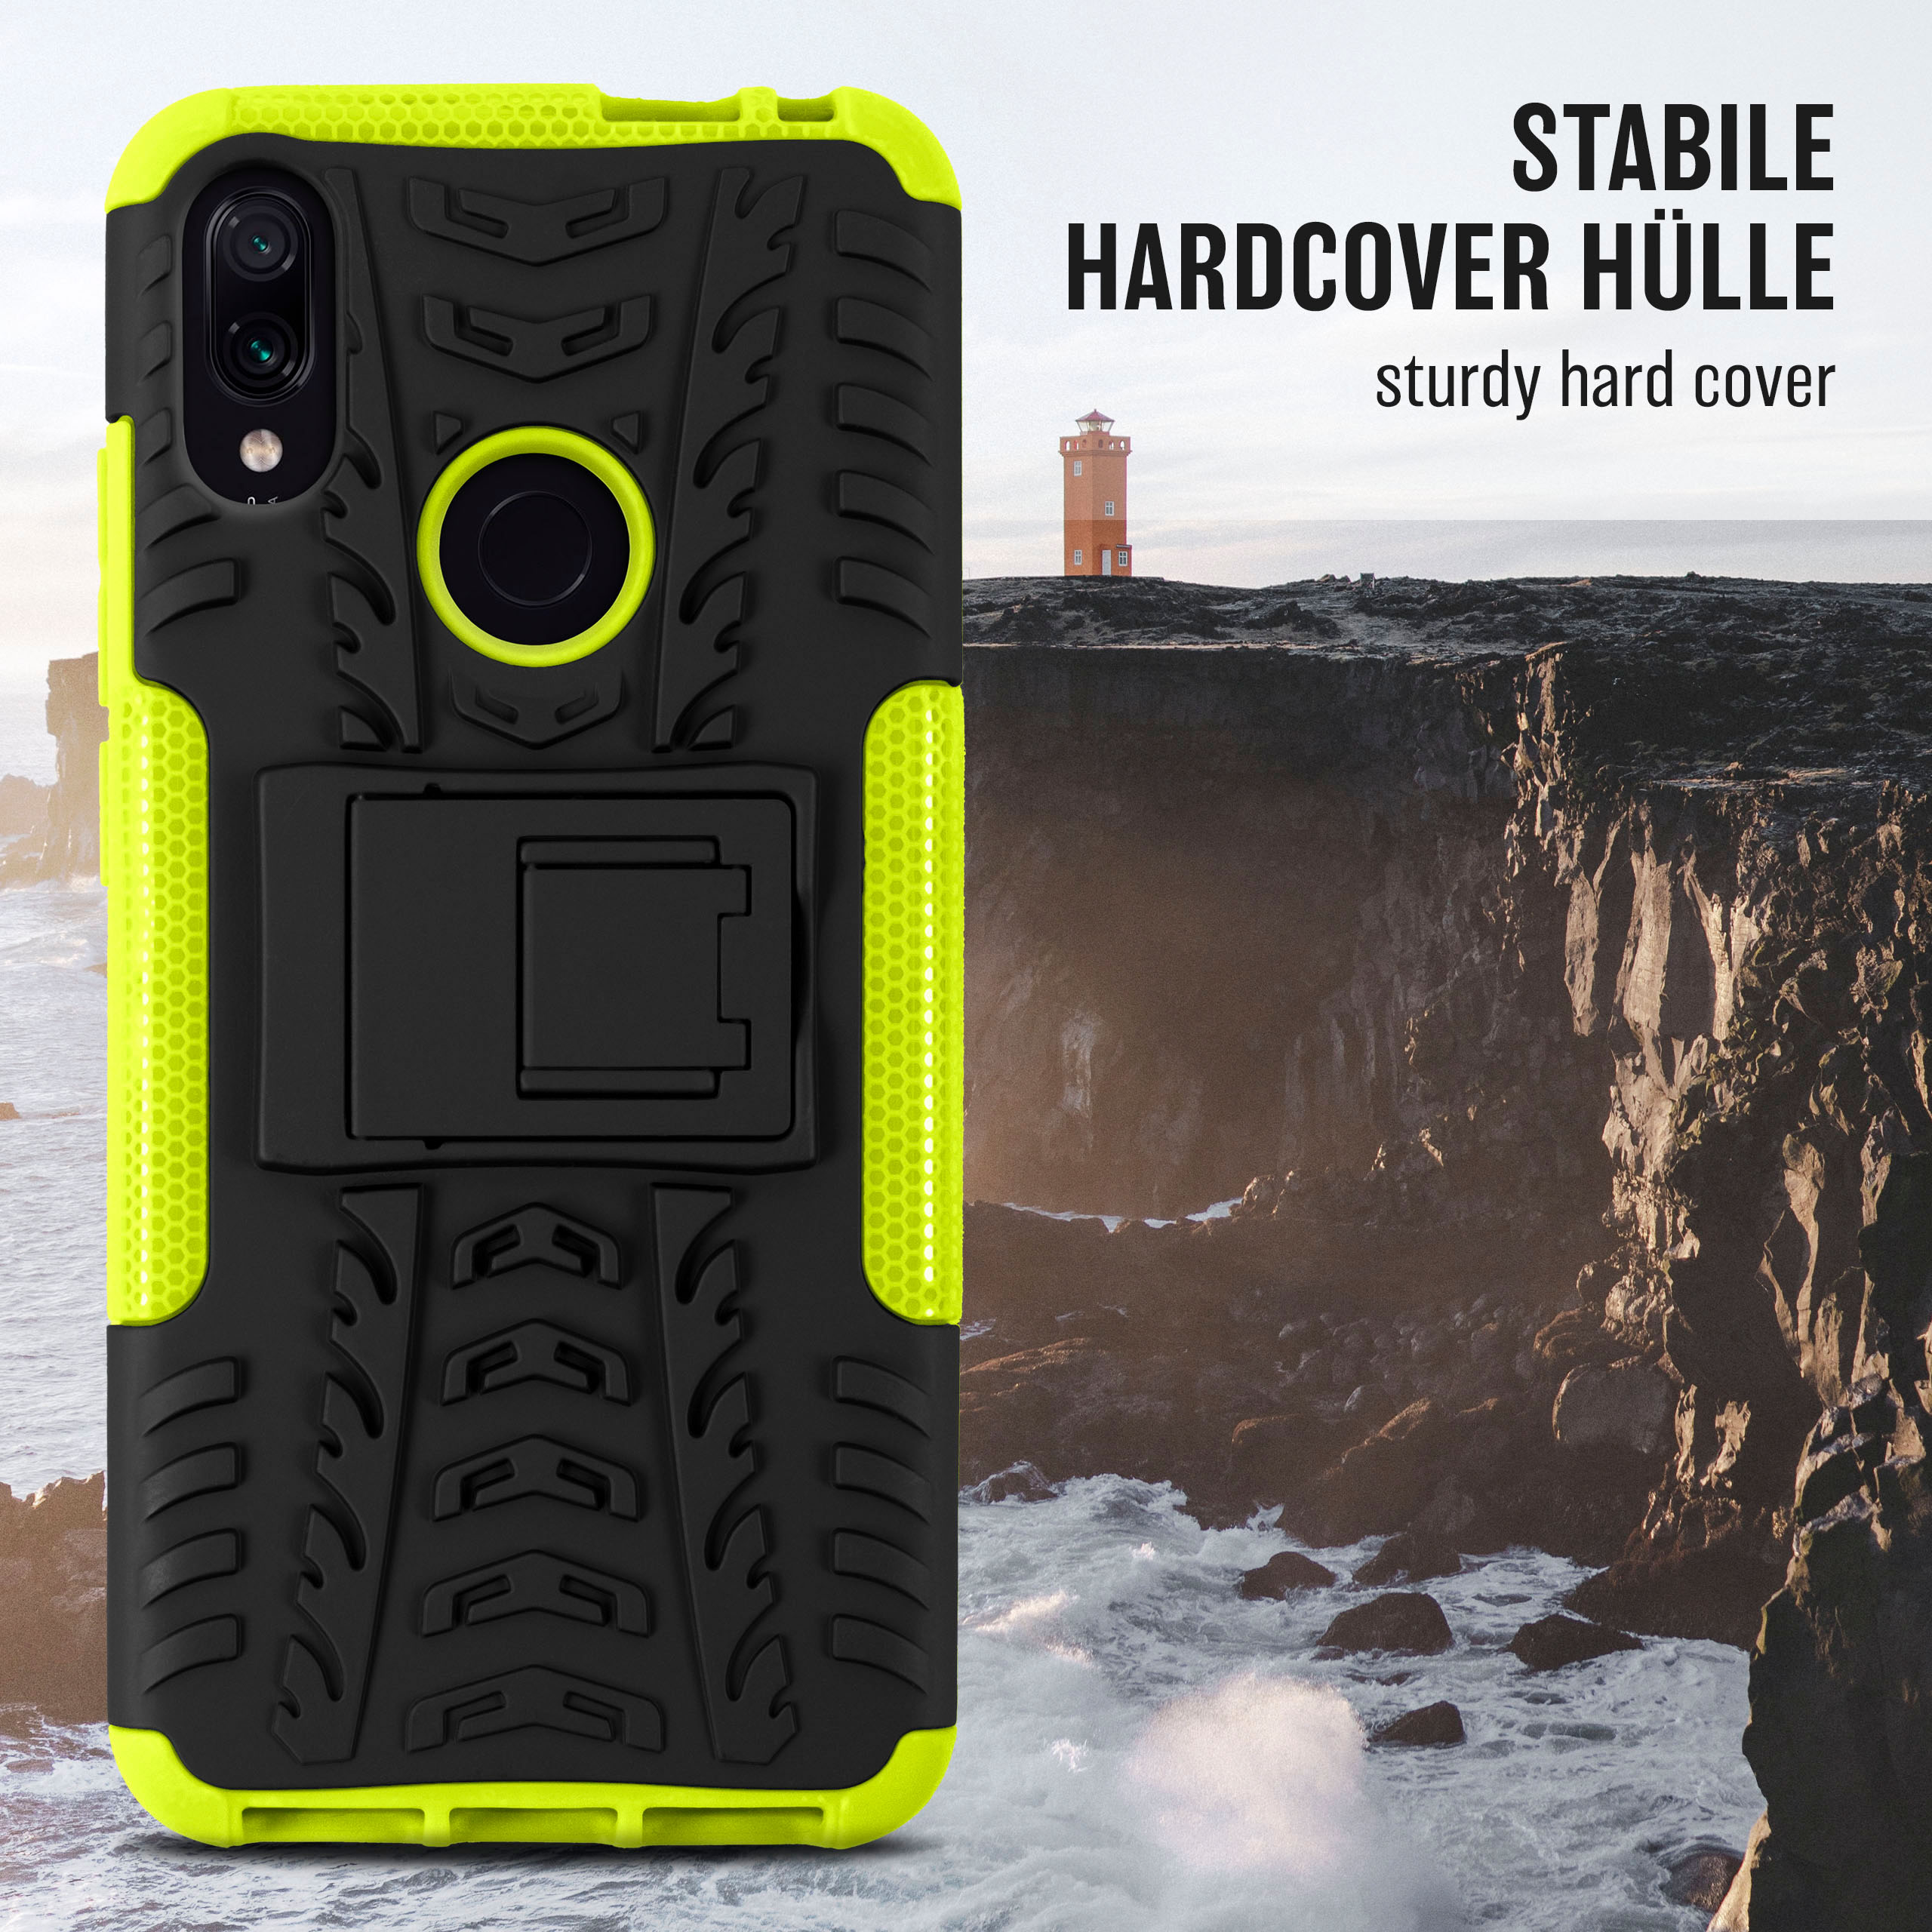 ONEFLOW Tank Case, Backcover, Lime 7S, Redmi 7/ Xiaomi, 7 / Pro Note Note